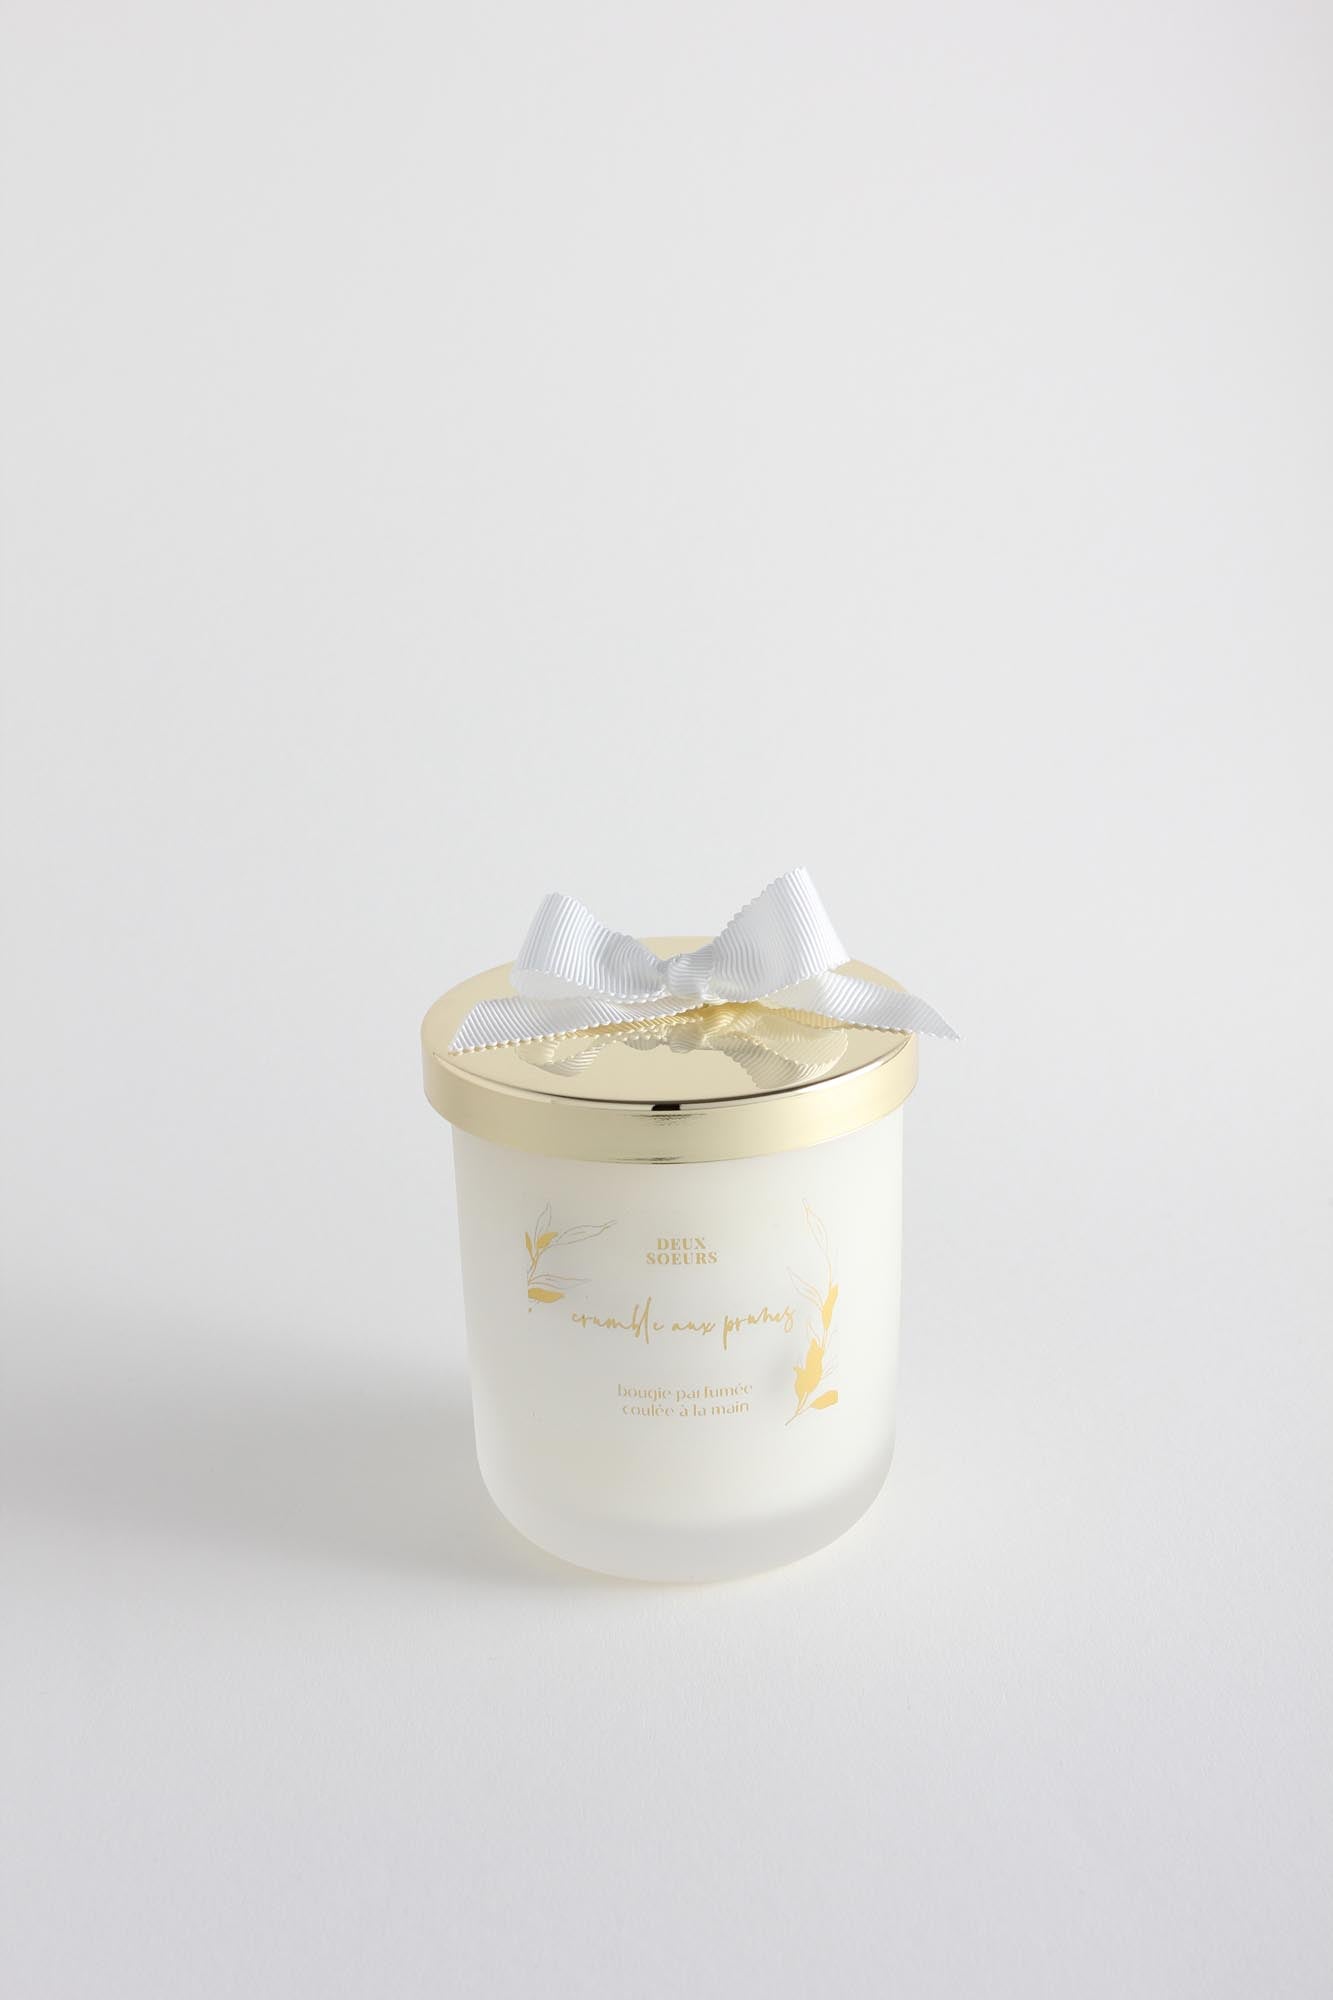 Candle Factory Bougie, 15 x 7 x 15 cm, French Vanilla 